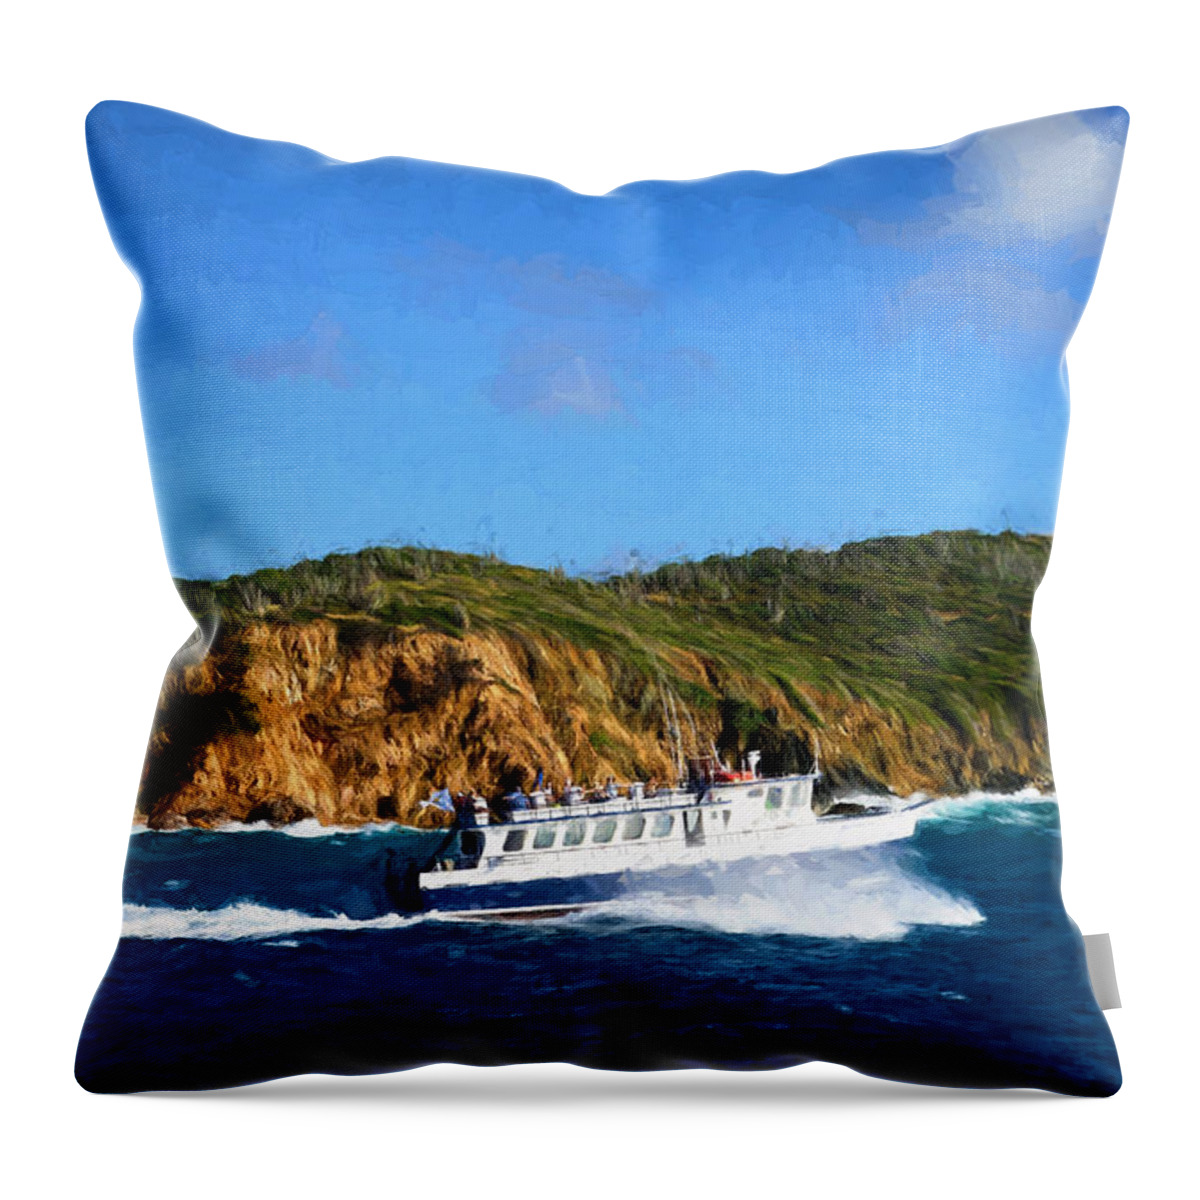 Caribbean Throw Pillow featuring the photograph Island Cruising by Greg Norrell